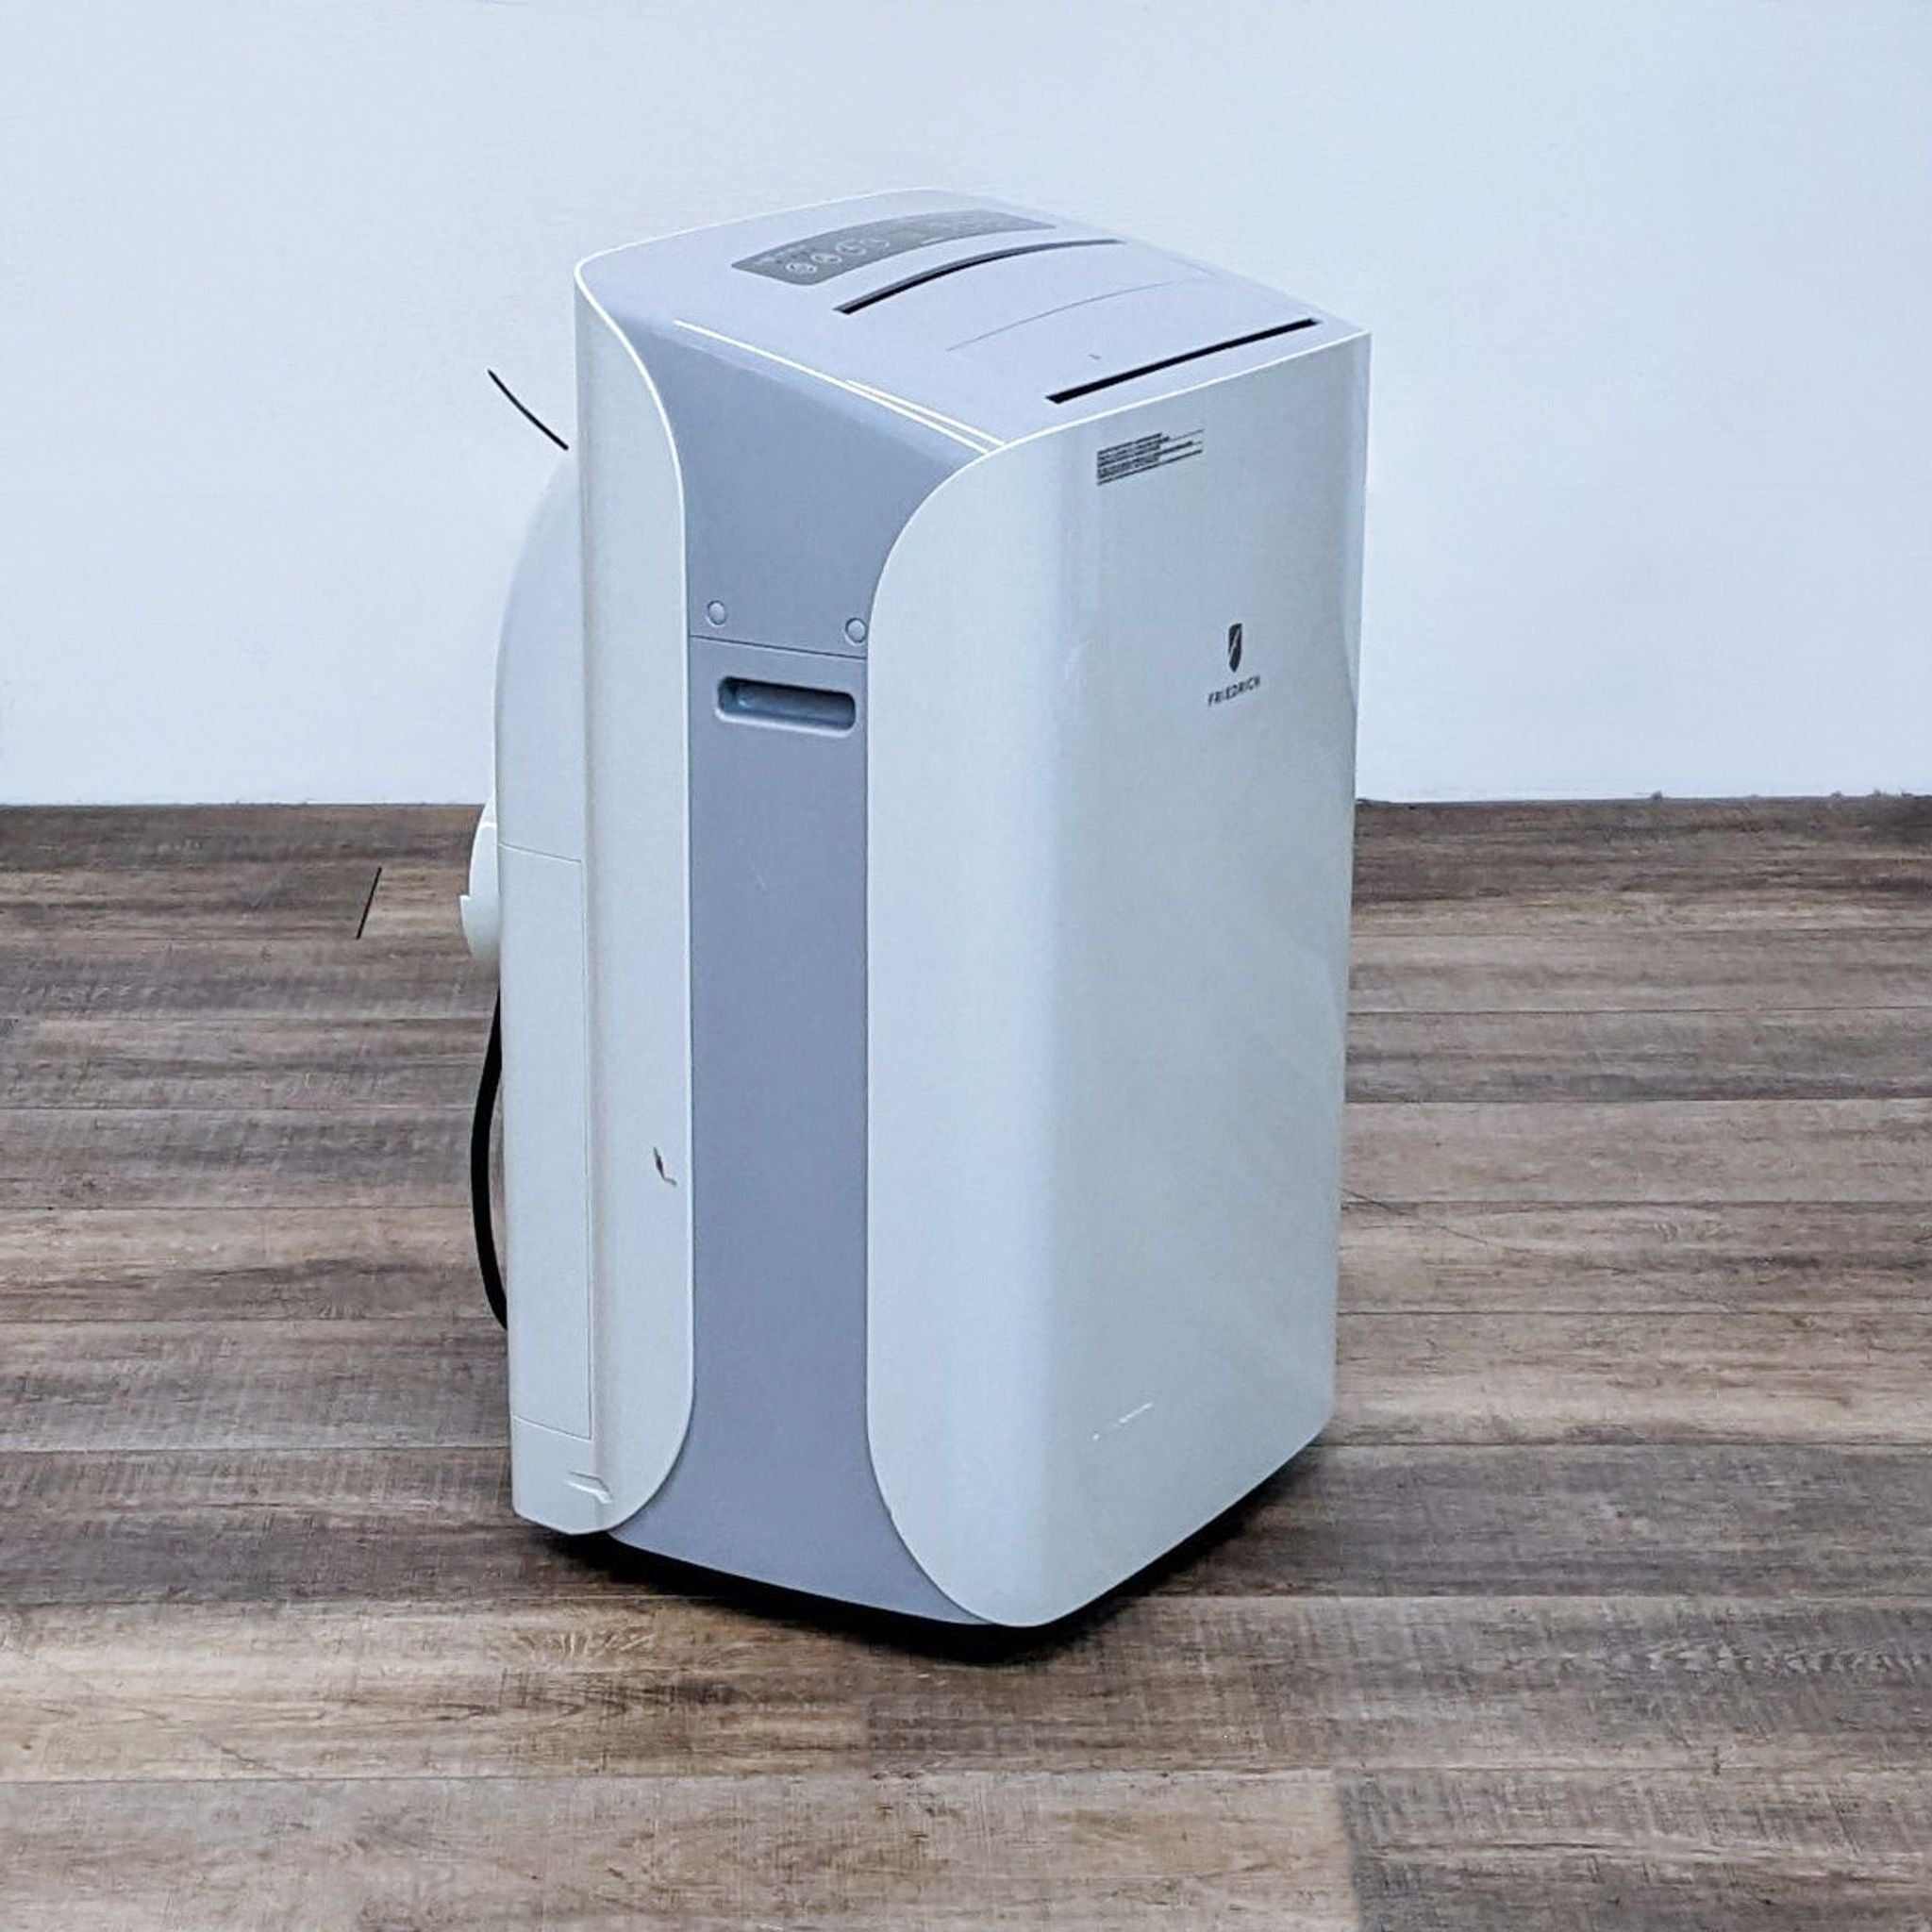 Alt text 2: Side angle of a white Friedrich portable AC unit showing its profile and vent.